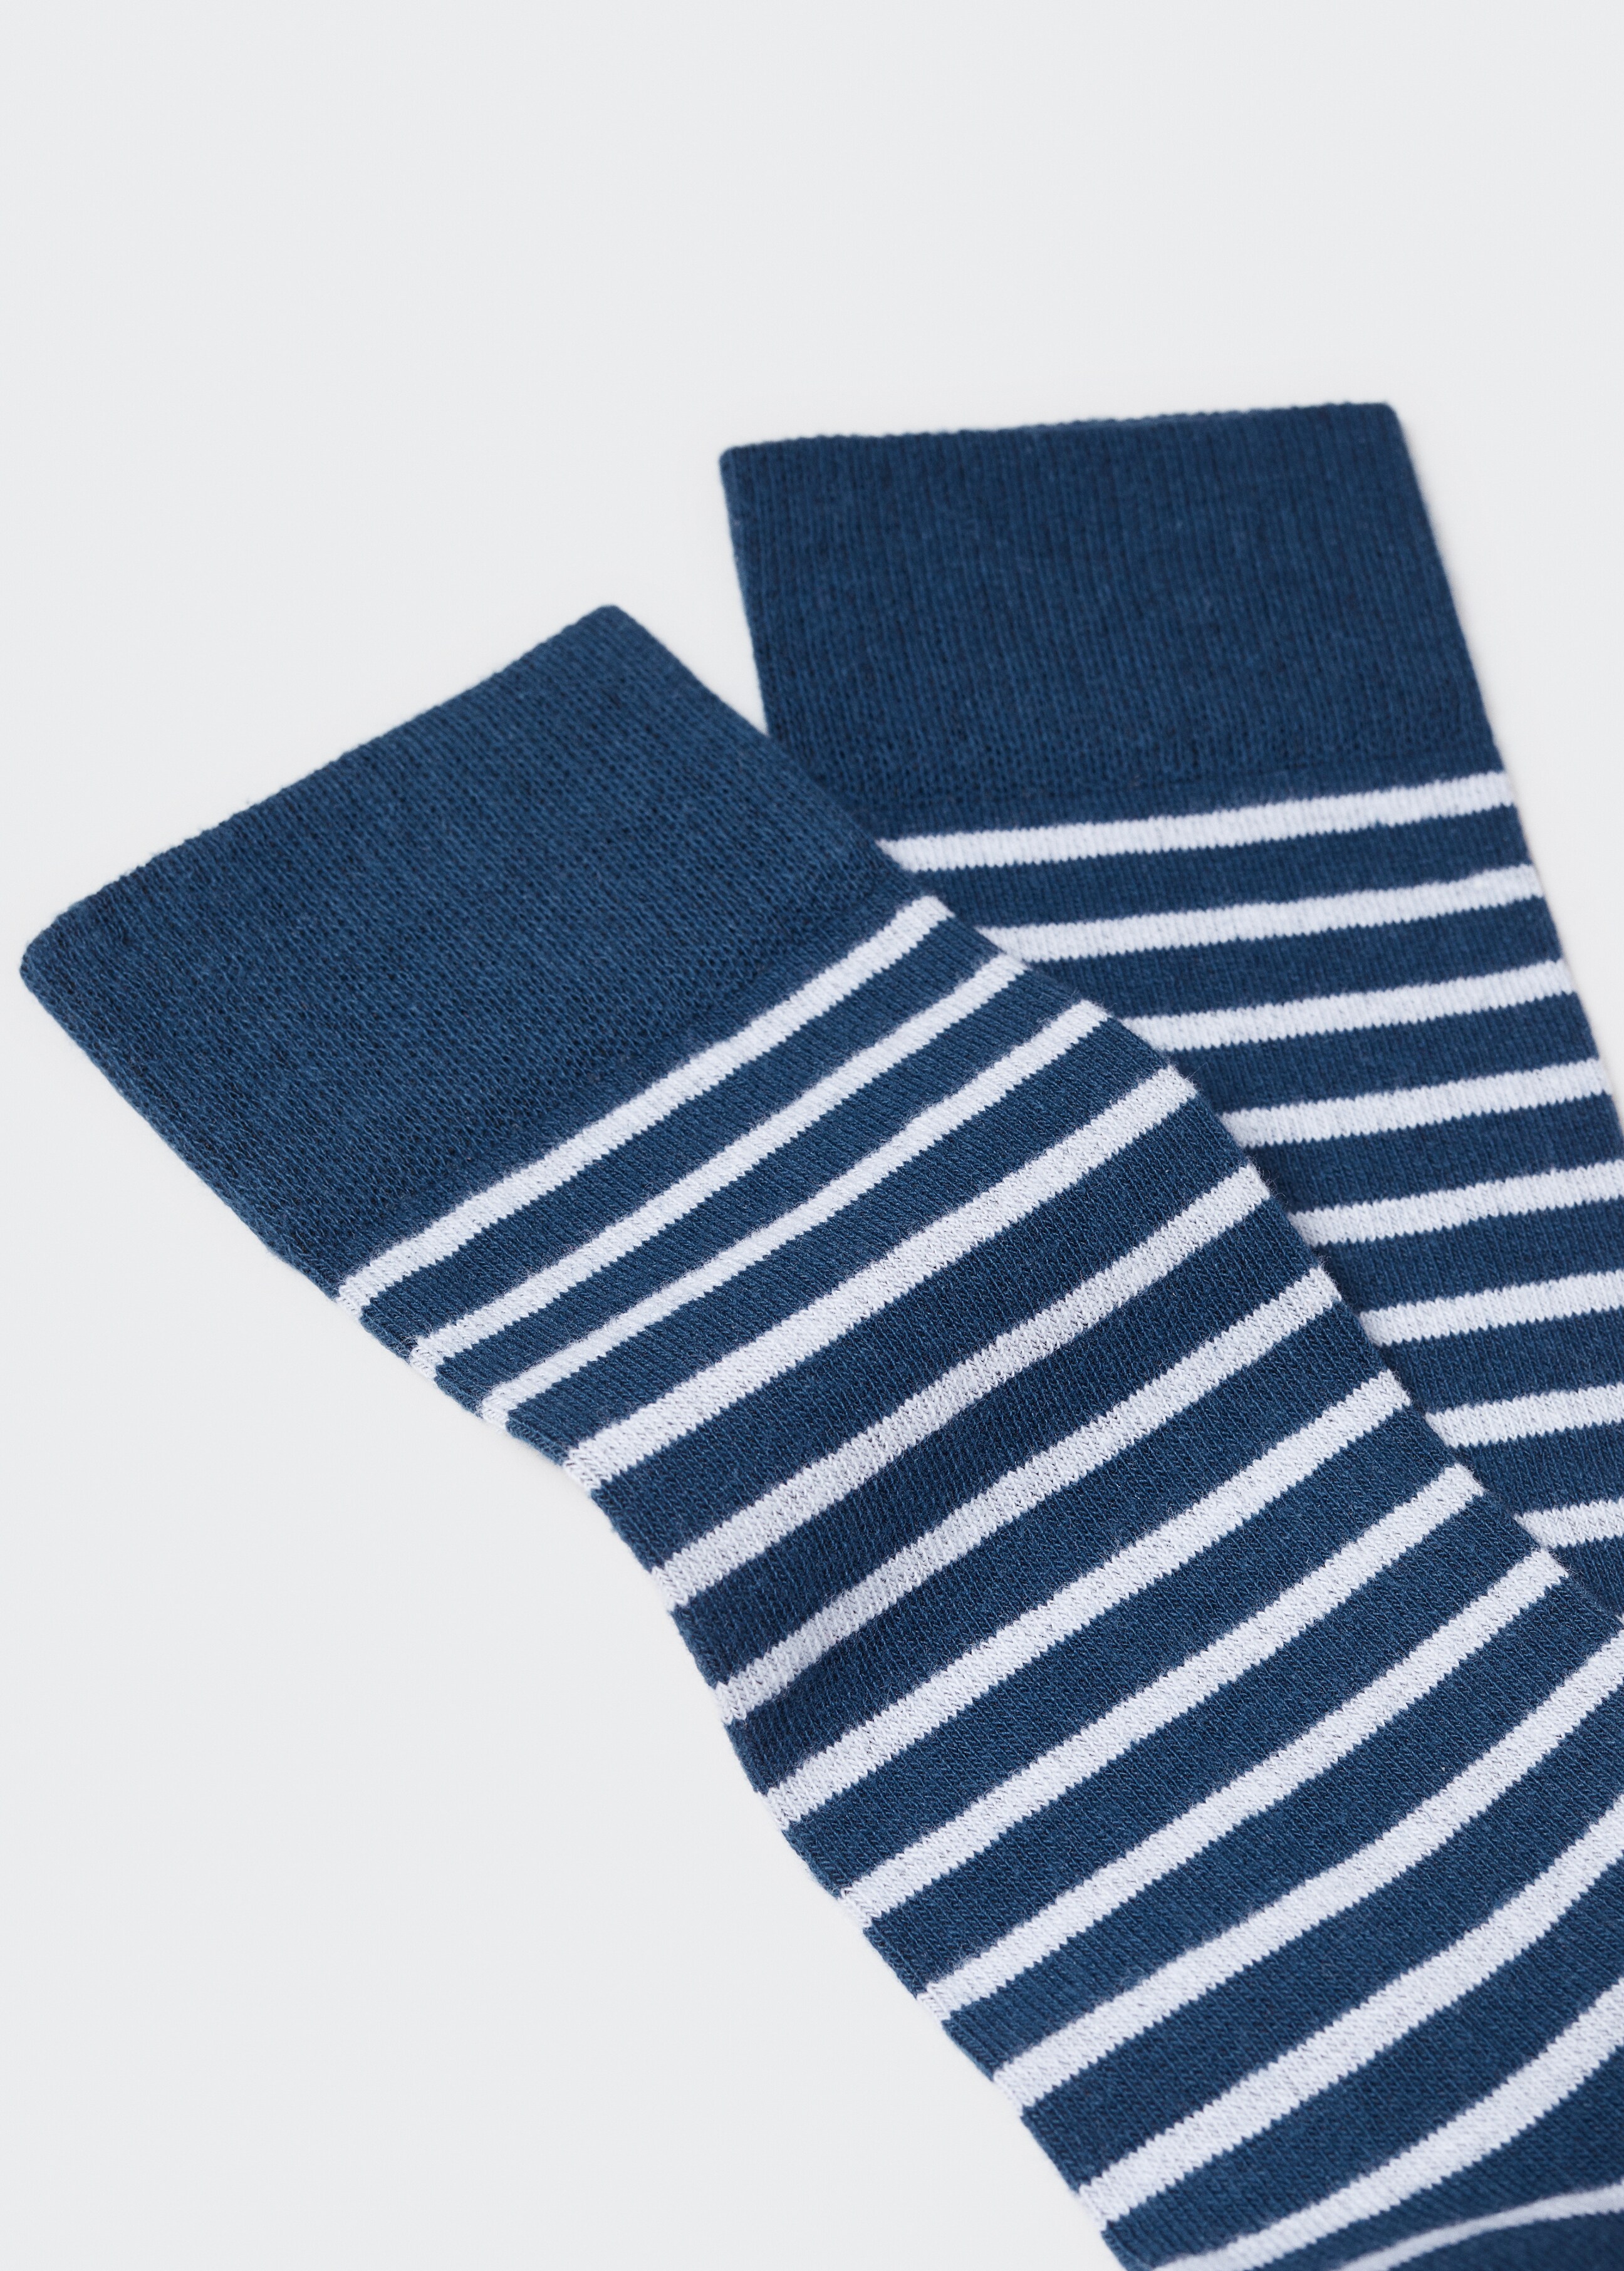 Striped cotton socks - Details of the article 8